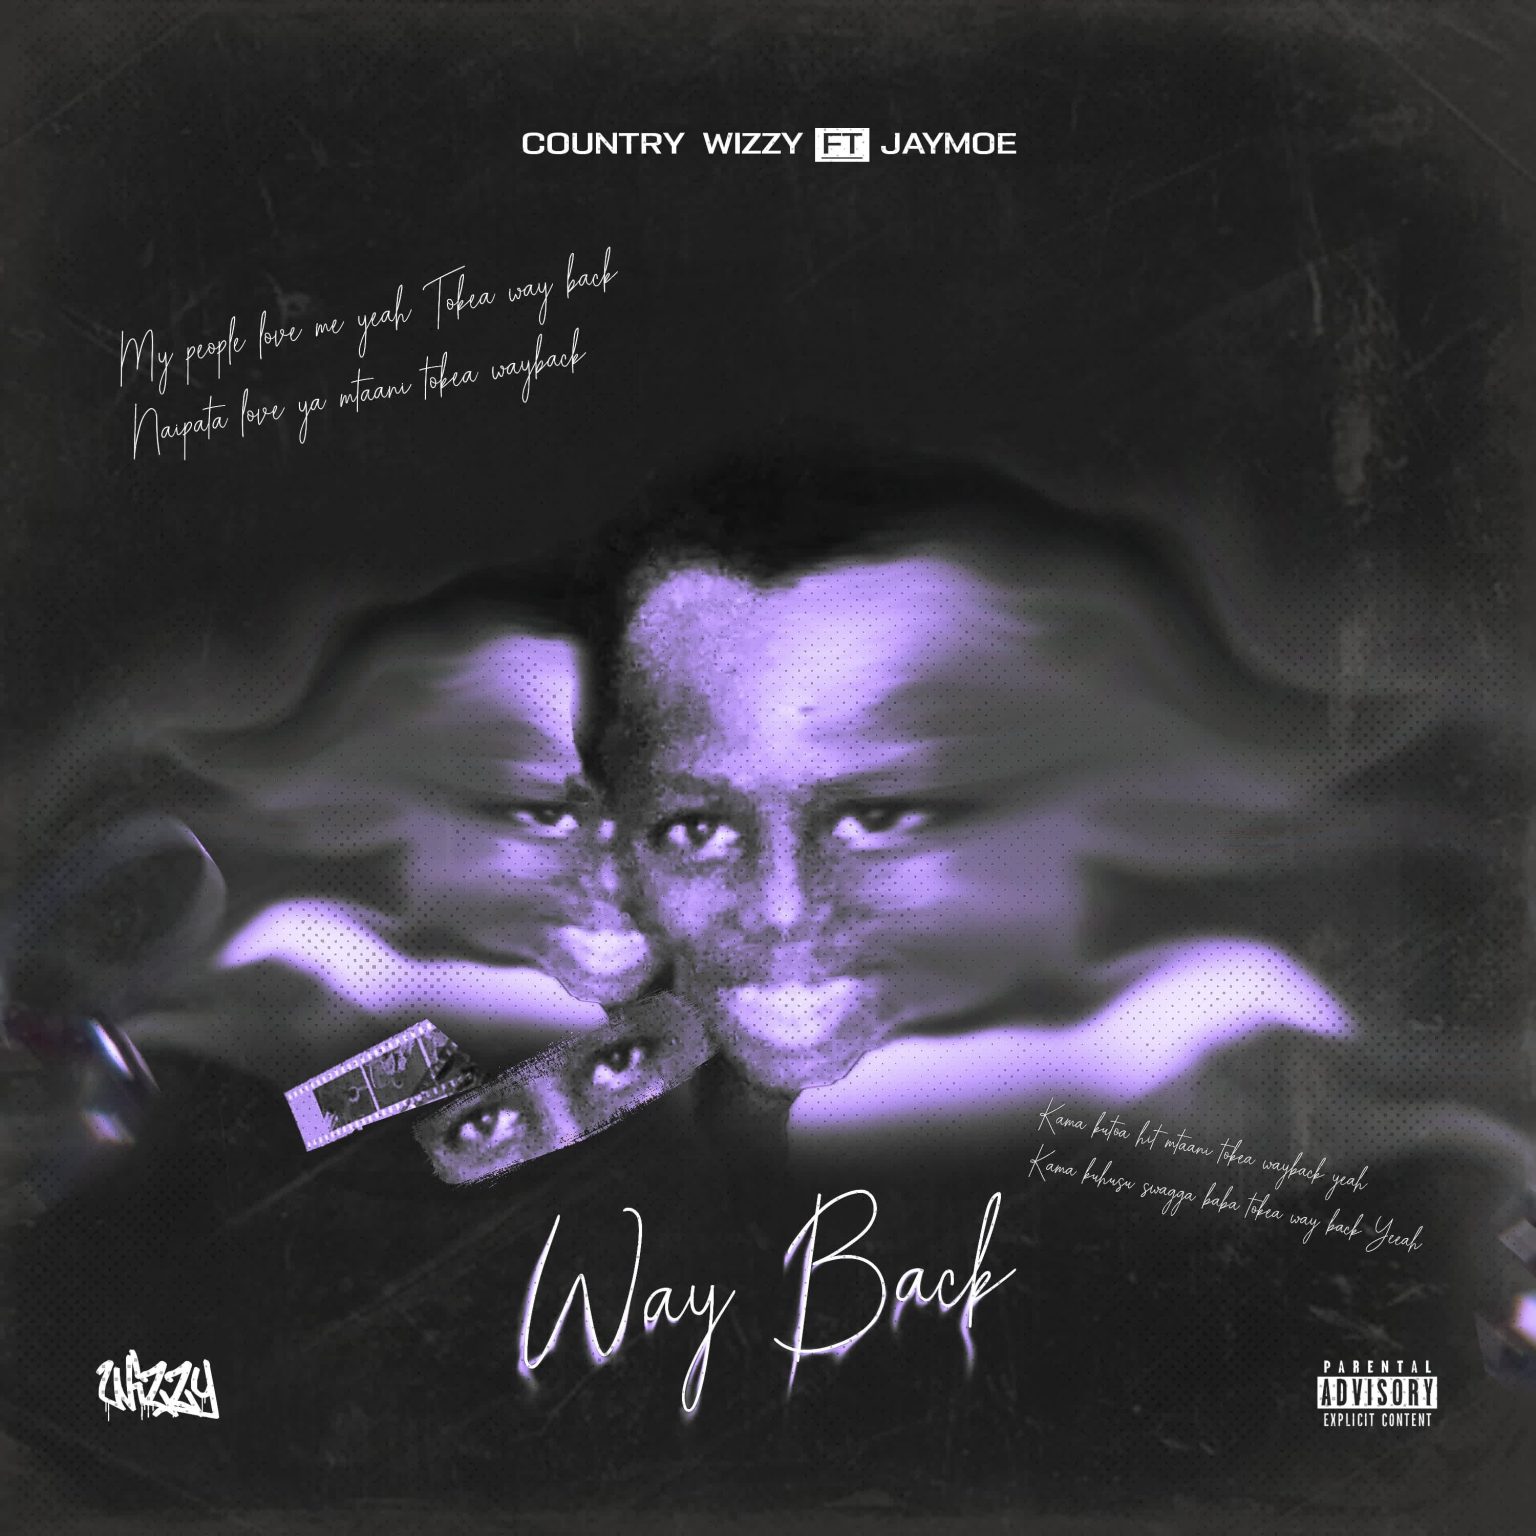 Download Audio | Country Wizzy Ft. Jay Moe – Way Back